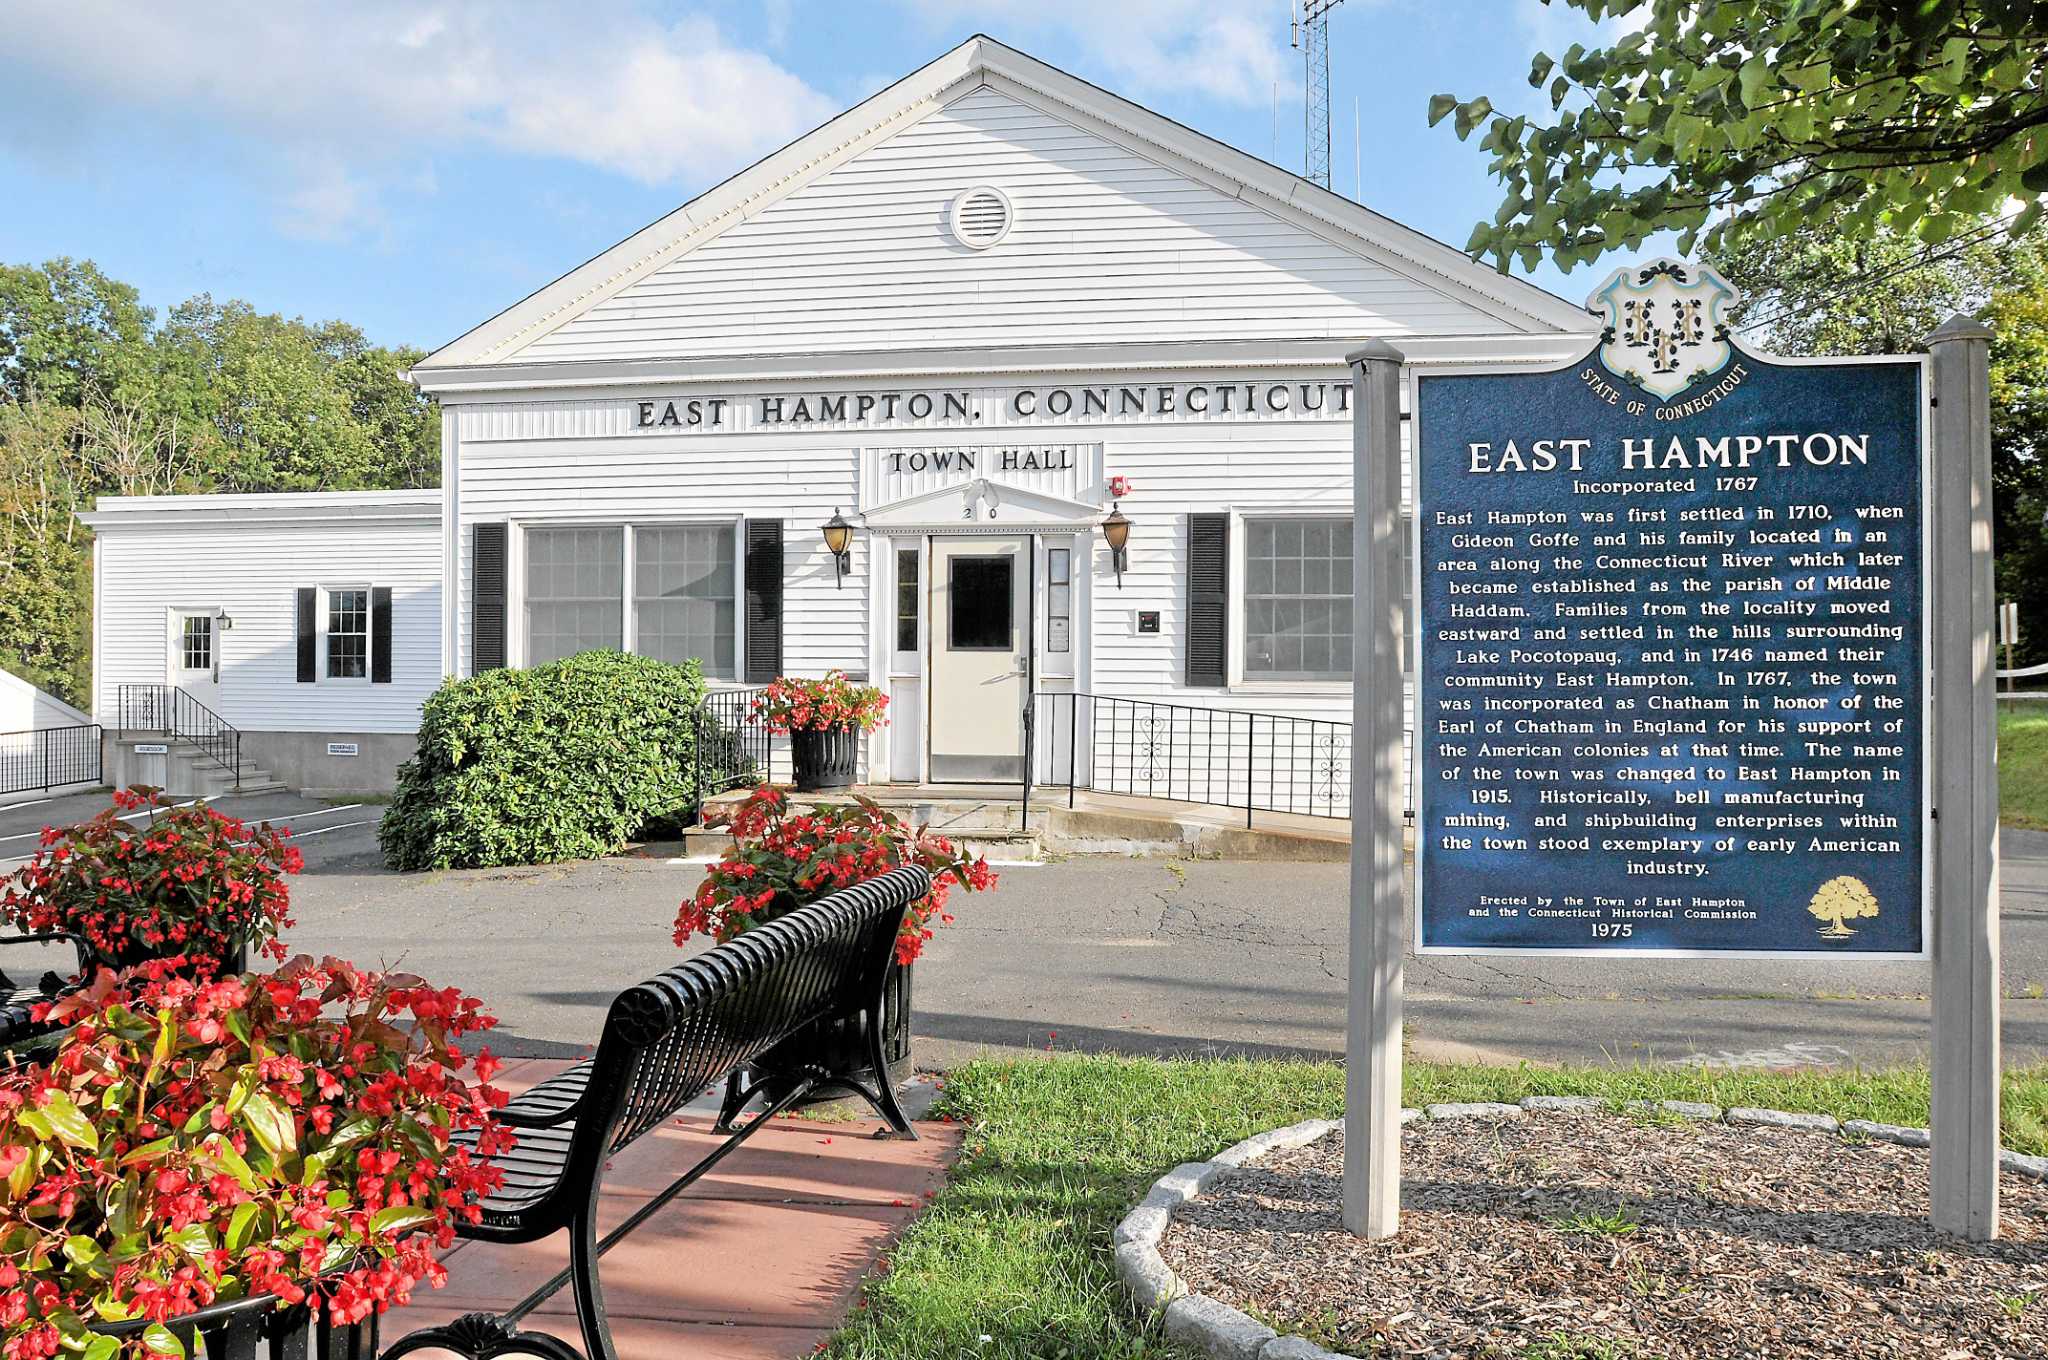 Finance board approves sale of East Hampton town hall building